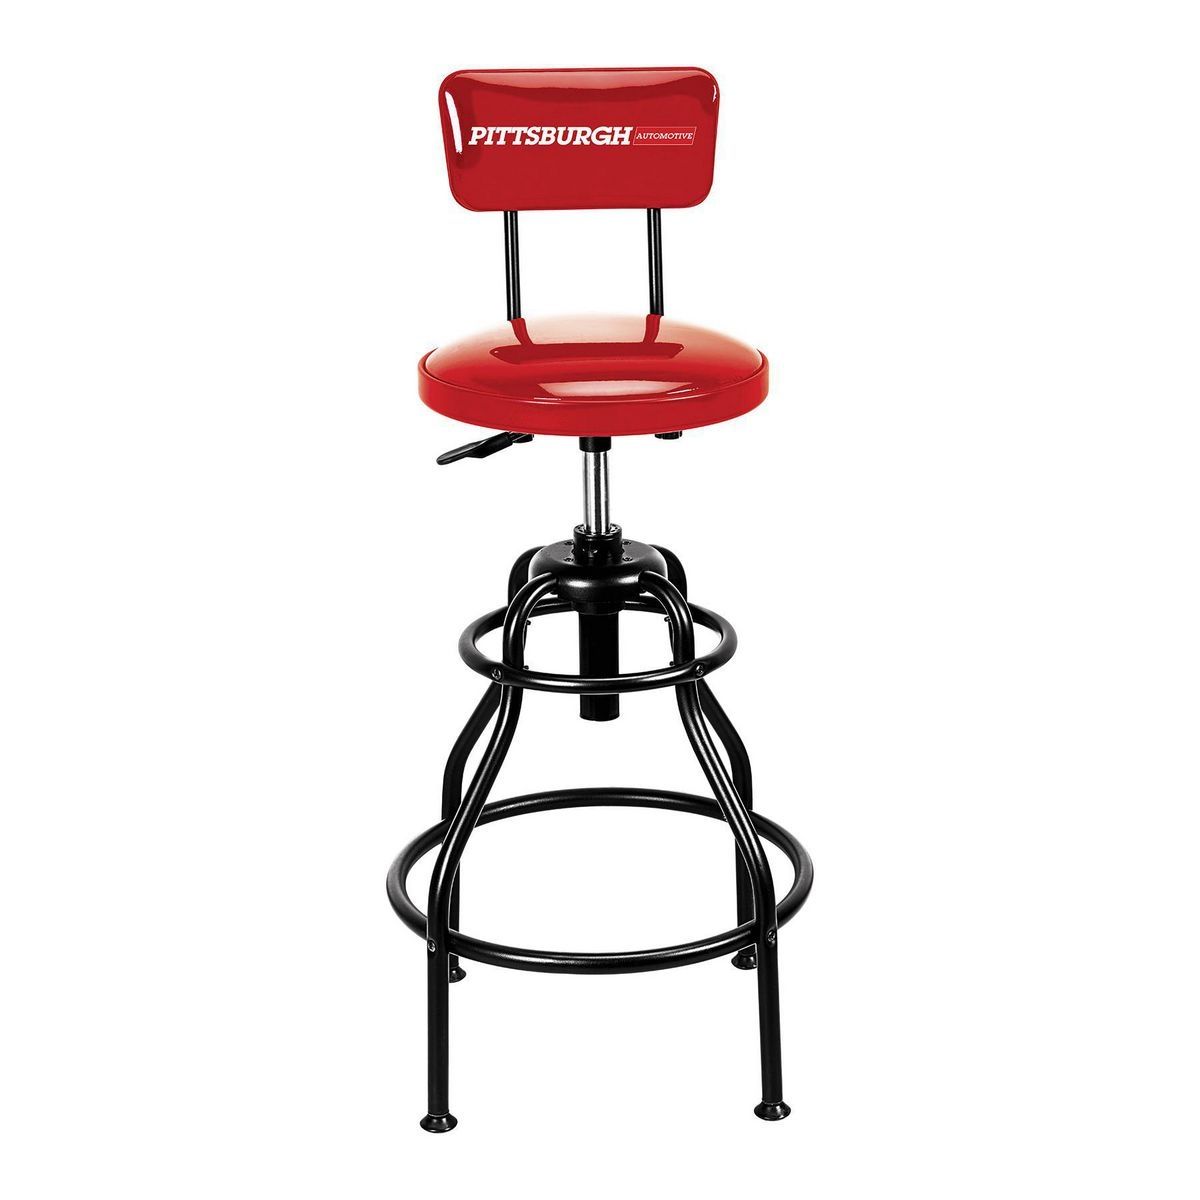 Coupons for PITTSBURGH AUTOMOTIVE Adjustable Shop Stool with Backrest